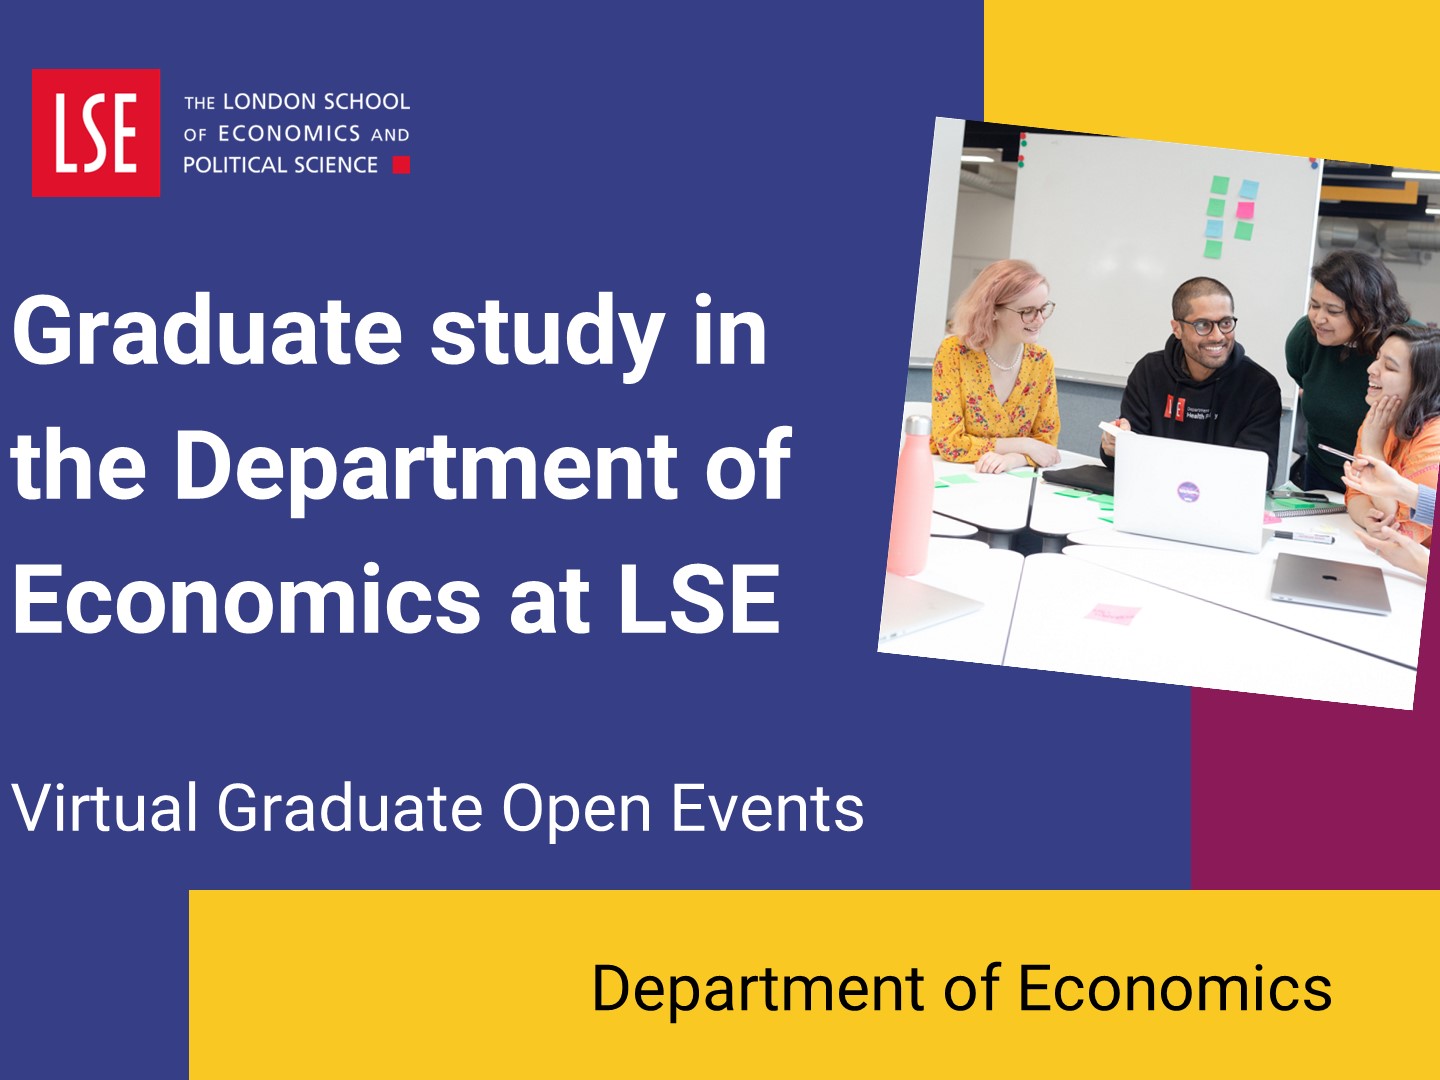 Introduction to Graduate Study in the Department of Economics at LSE